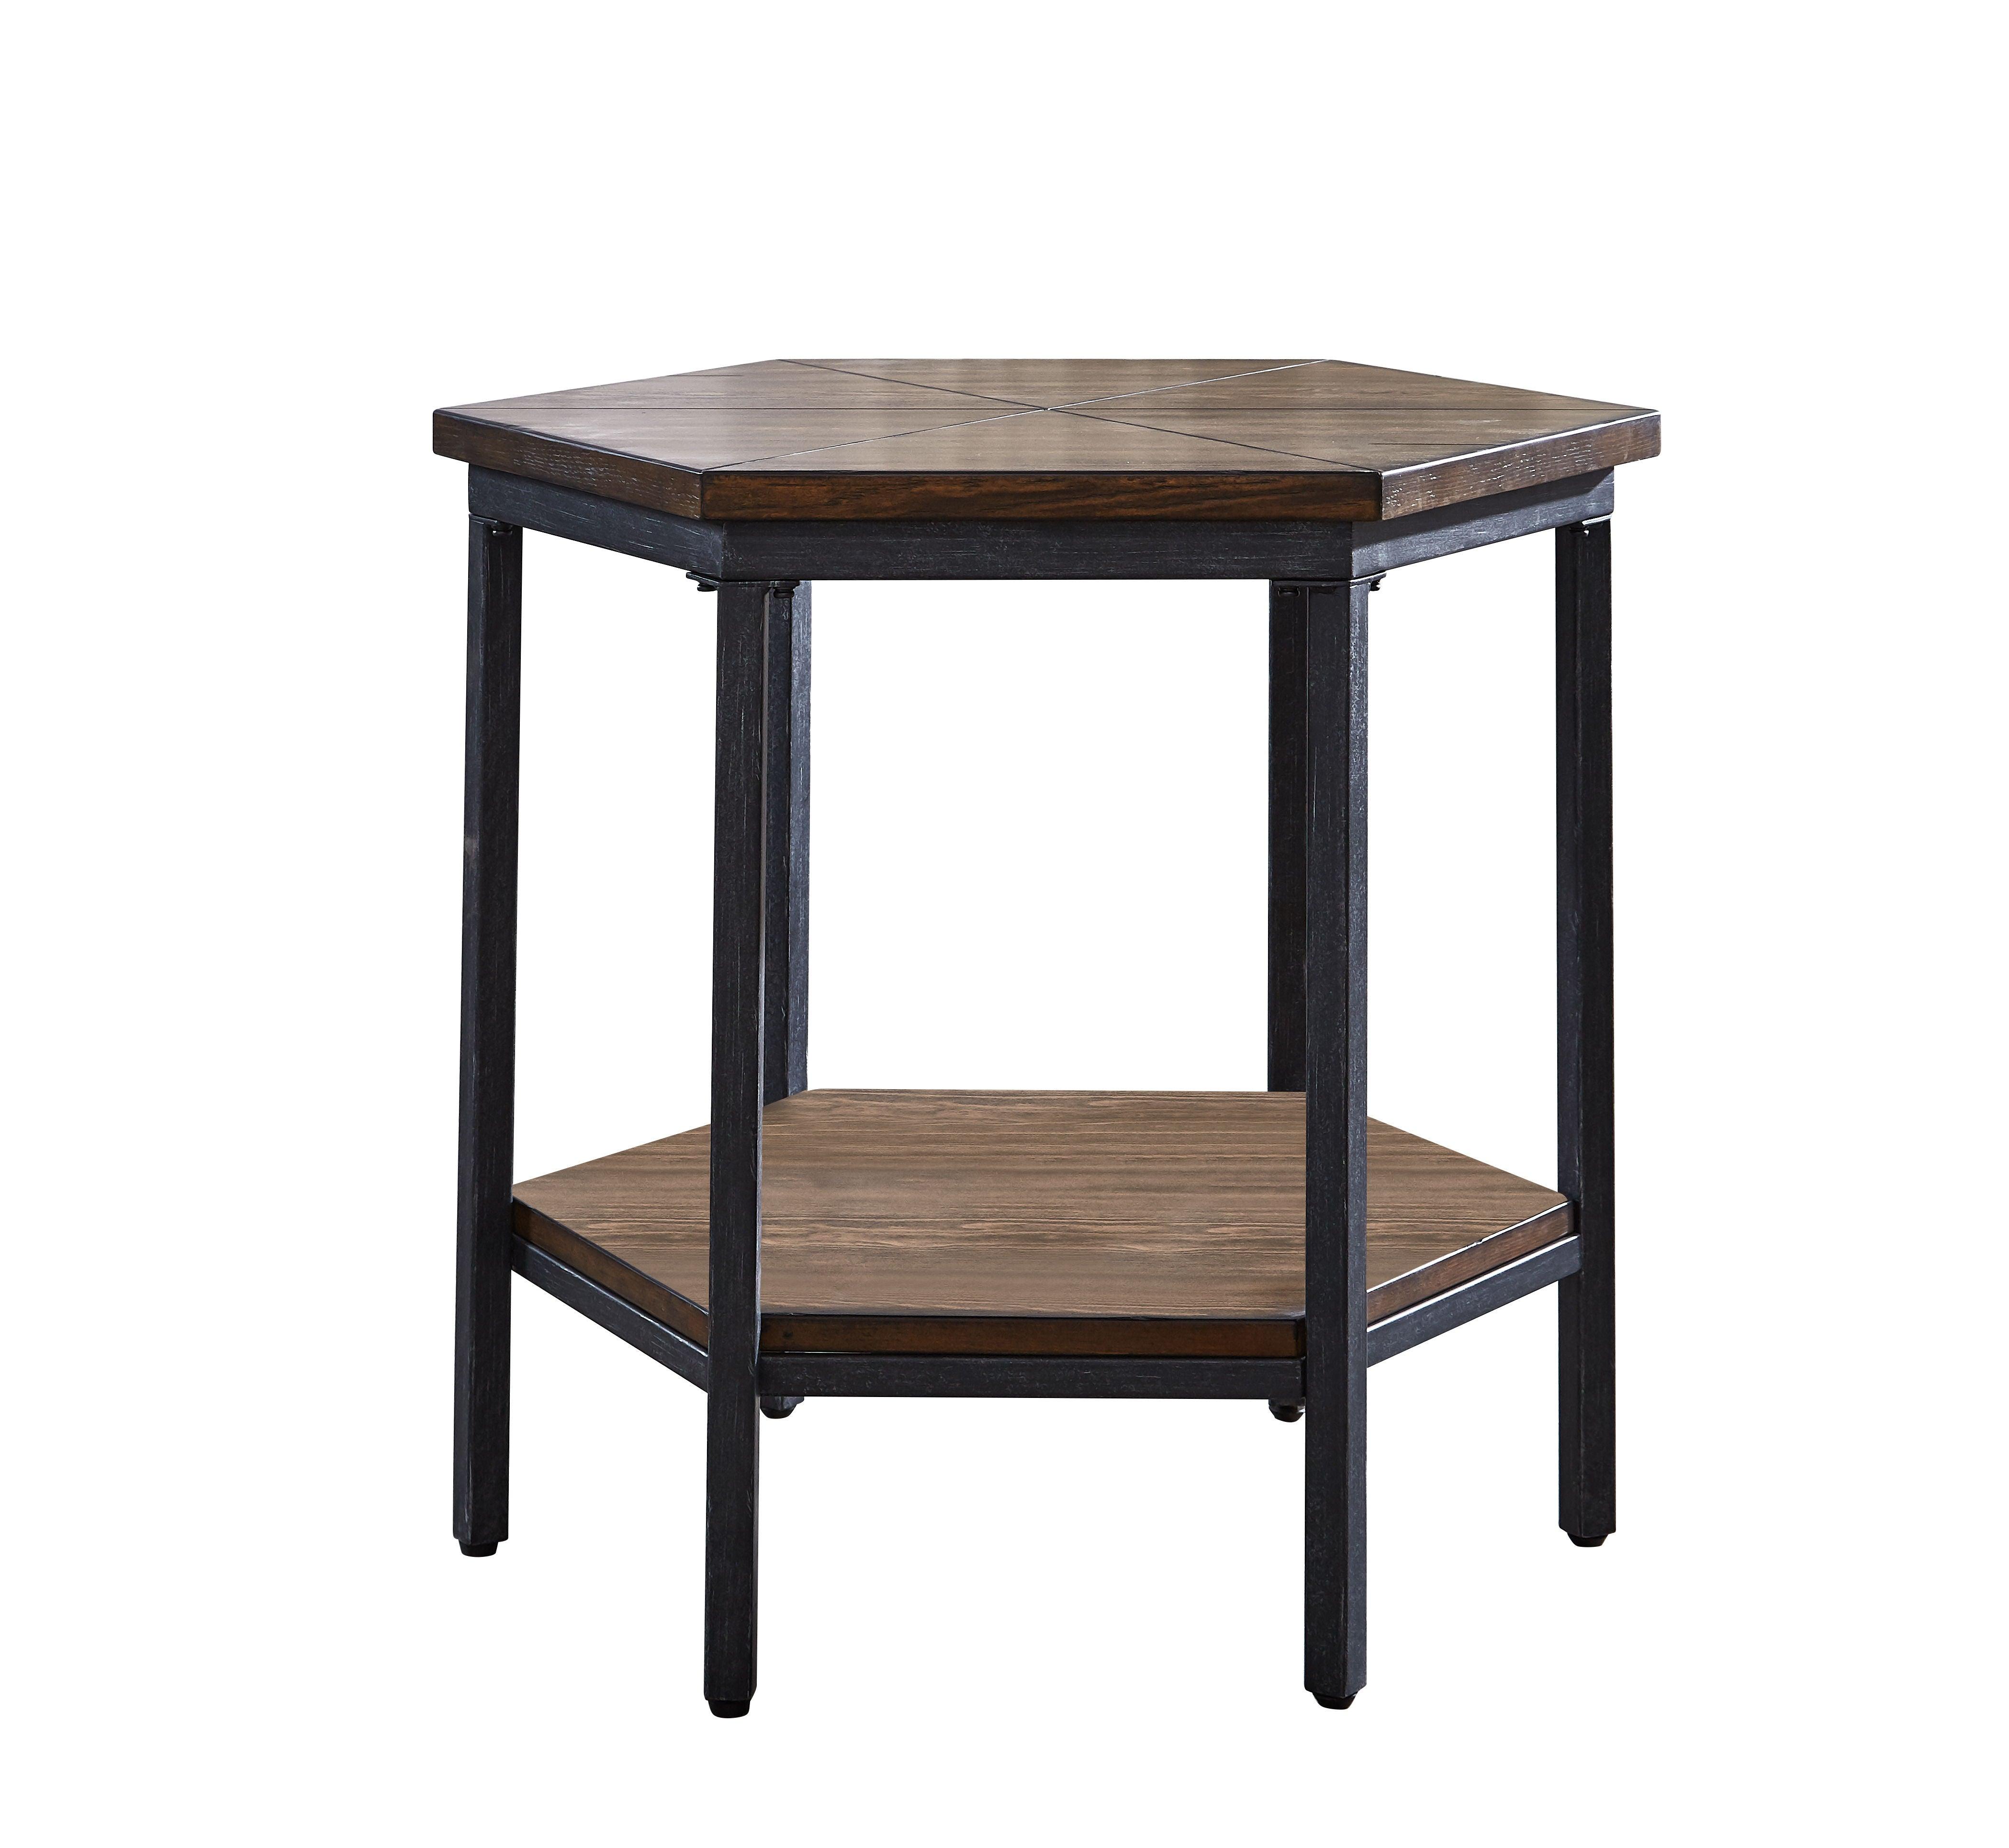 Steve Silver Furniture - Ultimo - Hexagon End Table - Brown - 5th Avenue Furniture